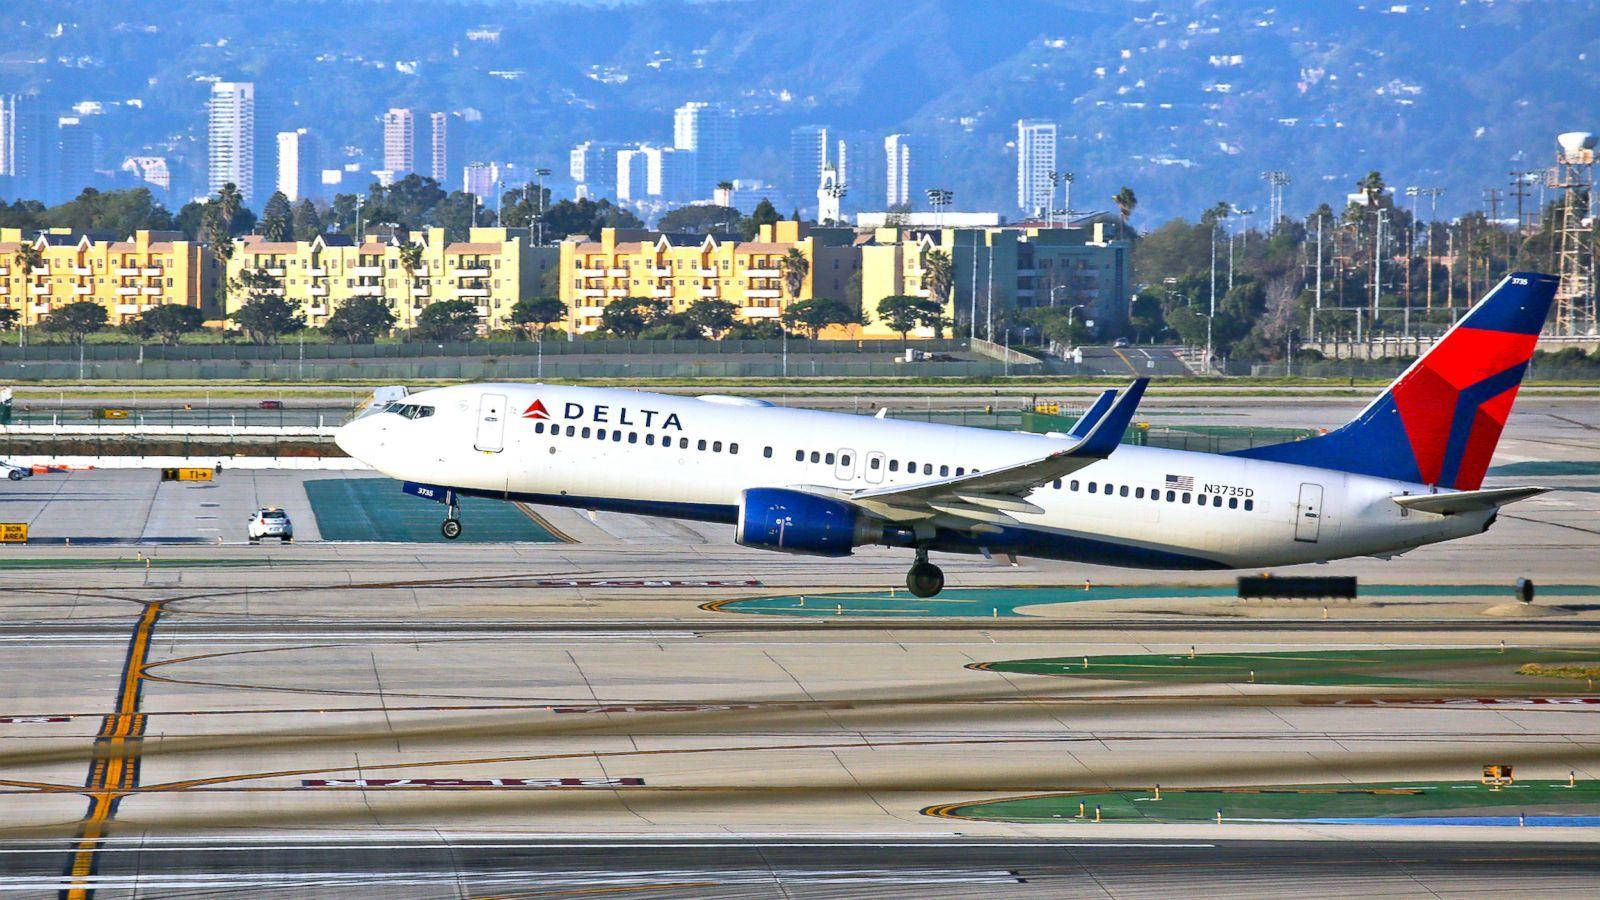 Delta Airlines Airplane On Airport Runway Wallpaper